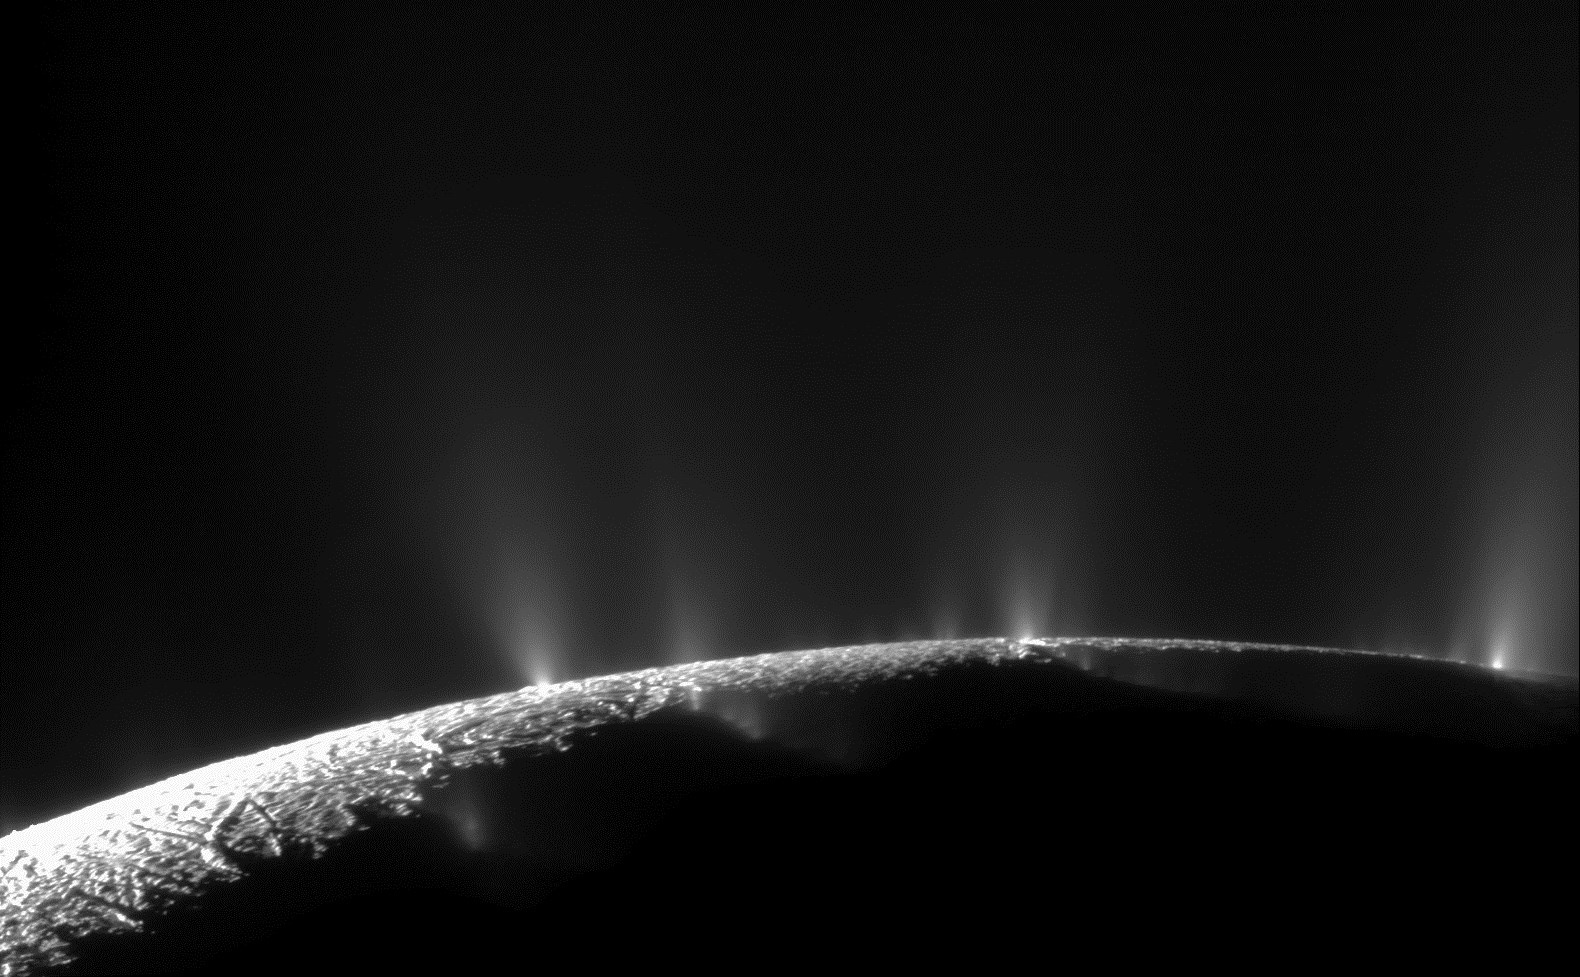 Dramatic plumes, both large and small, spray water ice and vapor from many locations along the famed "tiger stripes" near the south pole of Saturn's moon Enceladus.